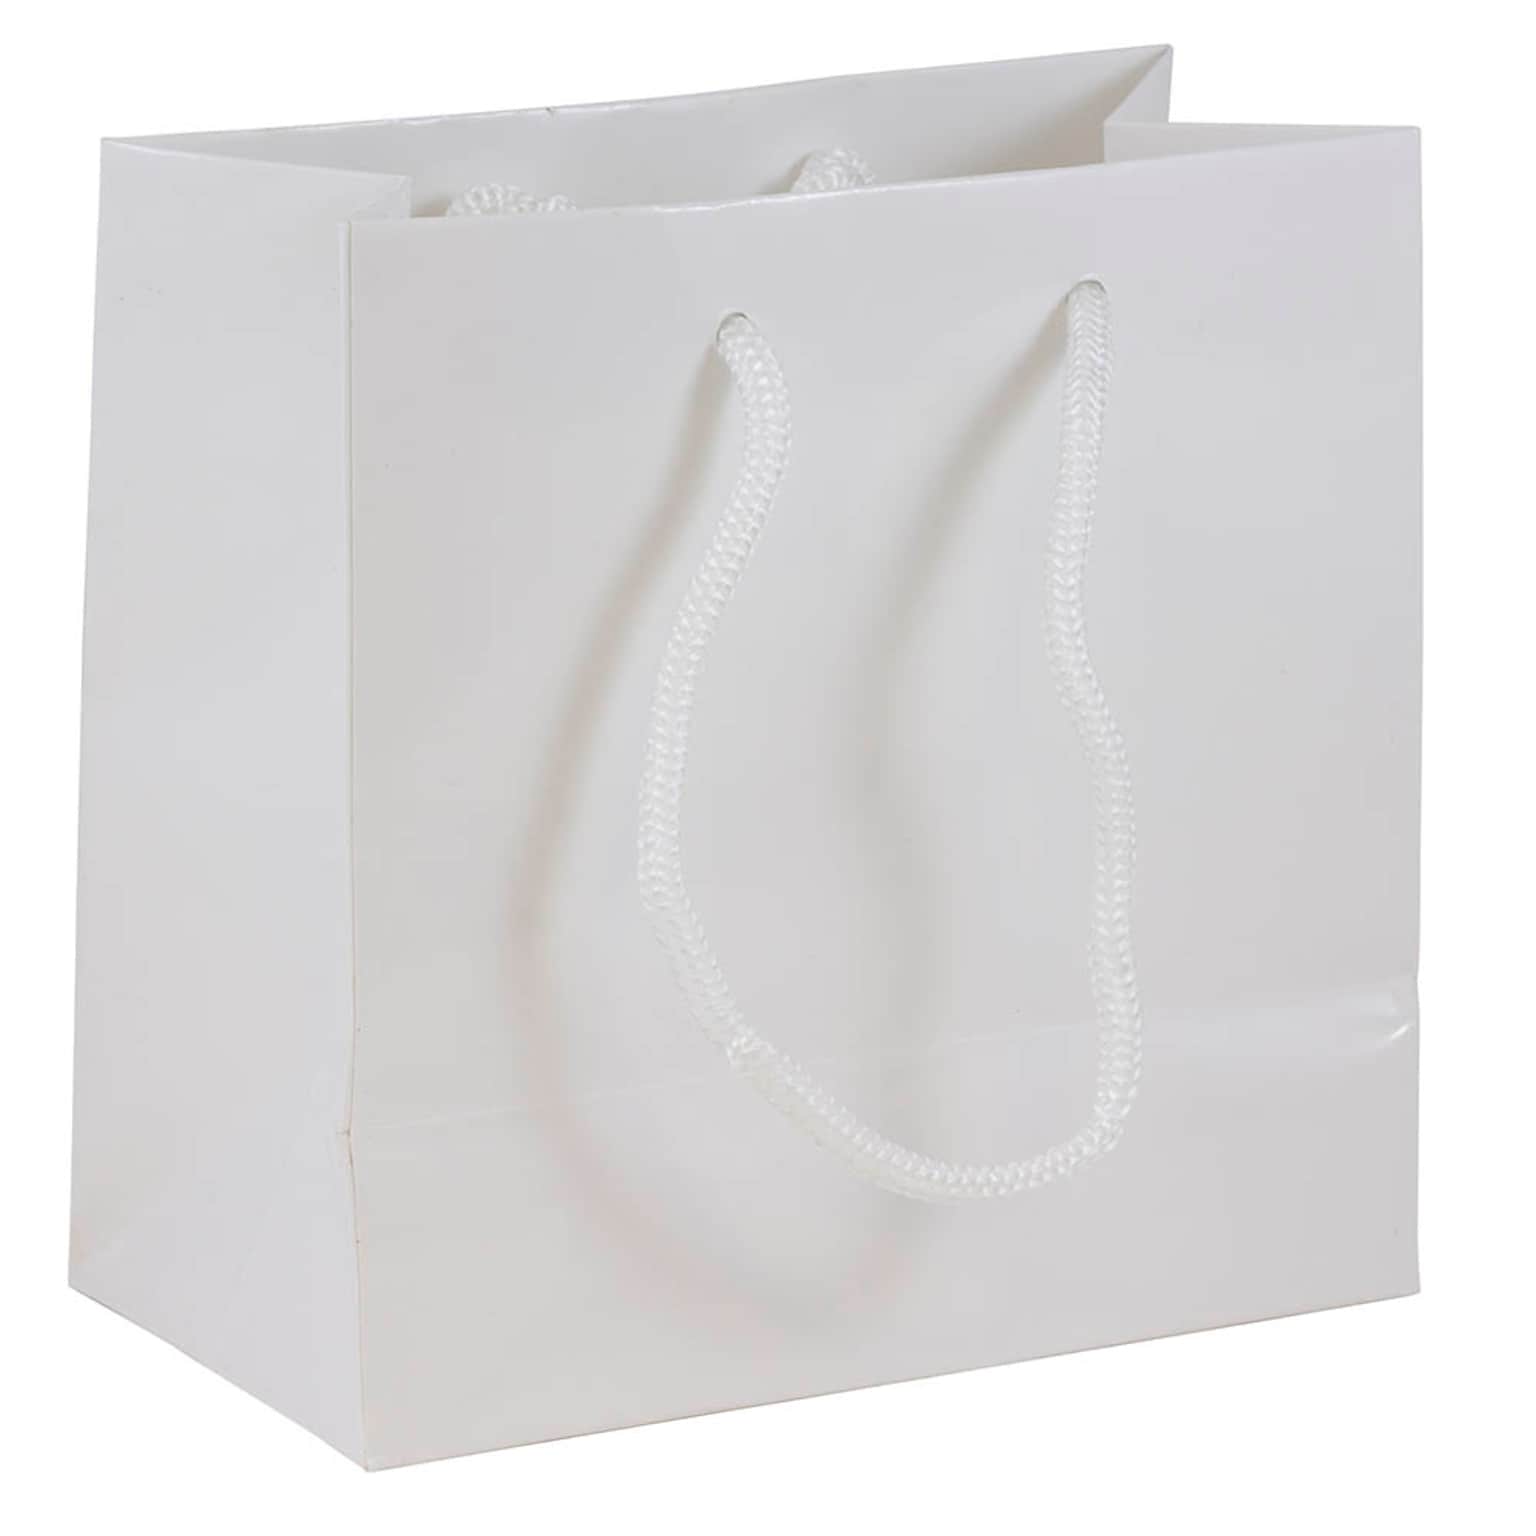 JAM Paper Glossy Gift Bag with Rope Handles, Small, White, 100 Bags/Pack (896GLWH100)